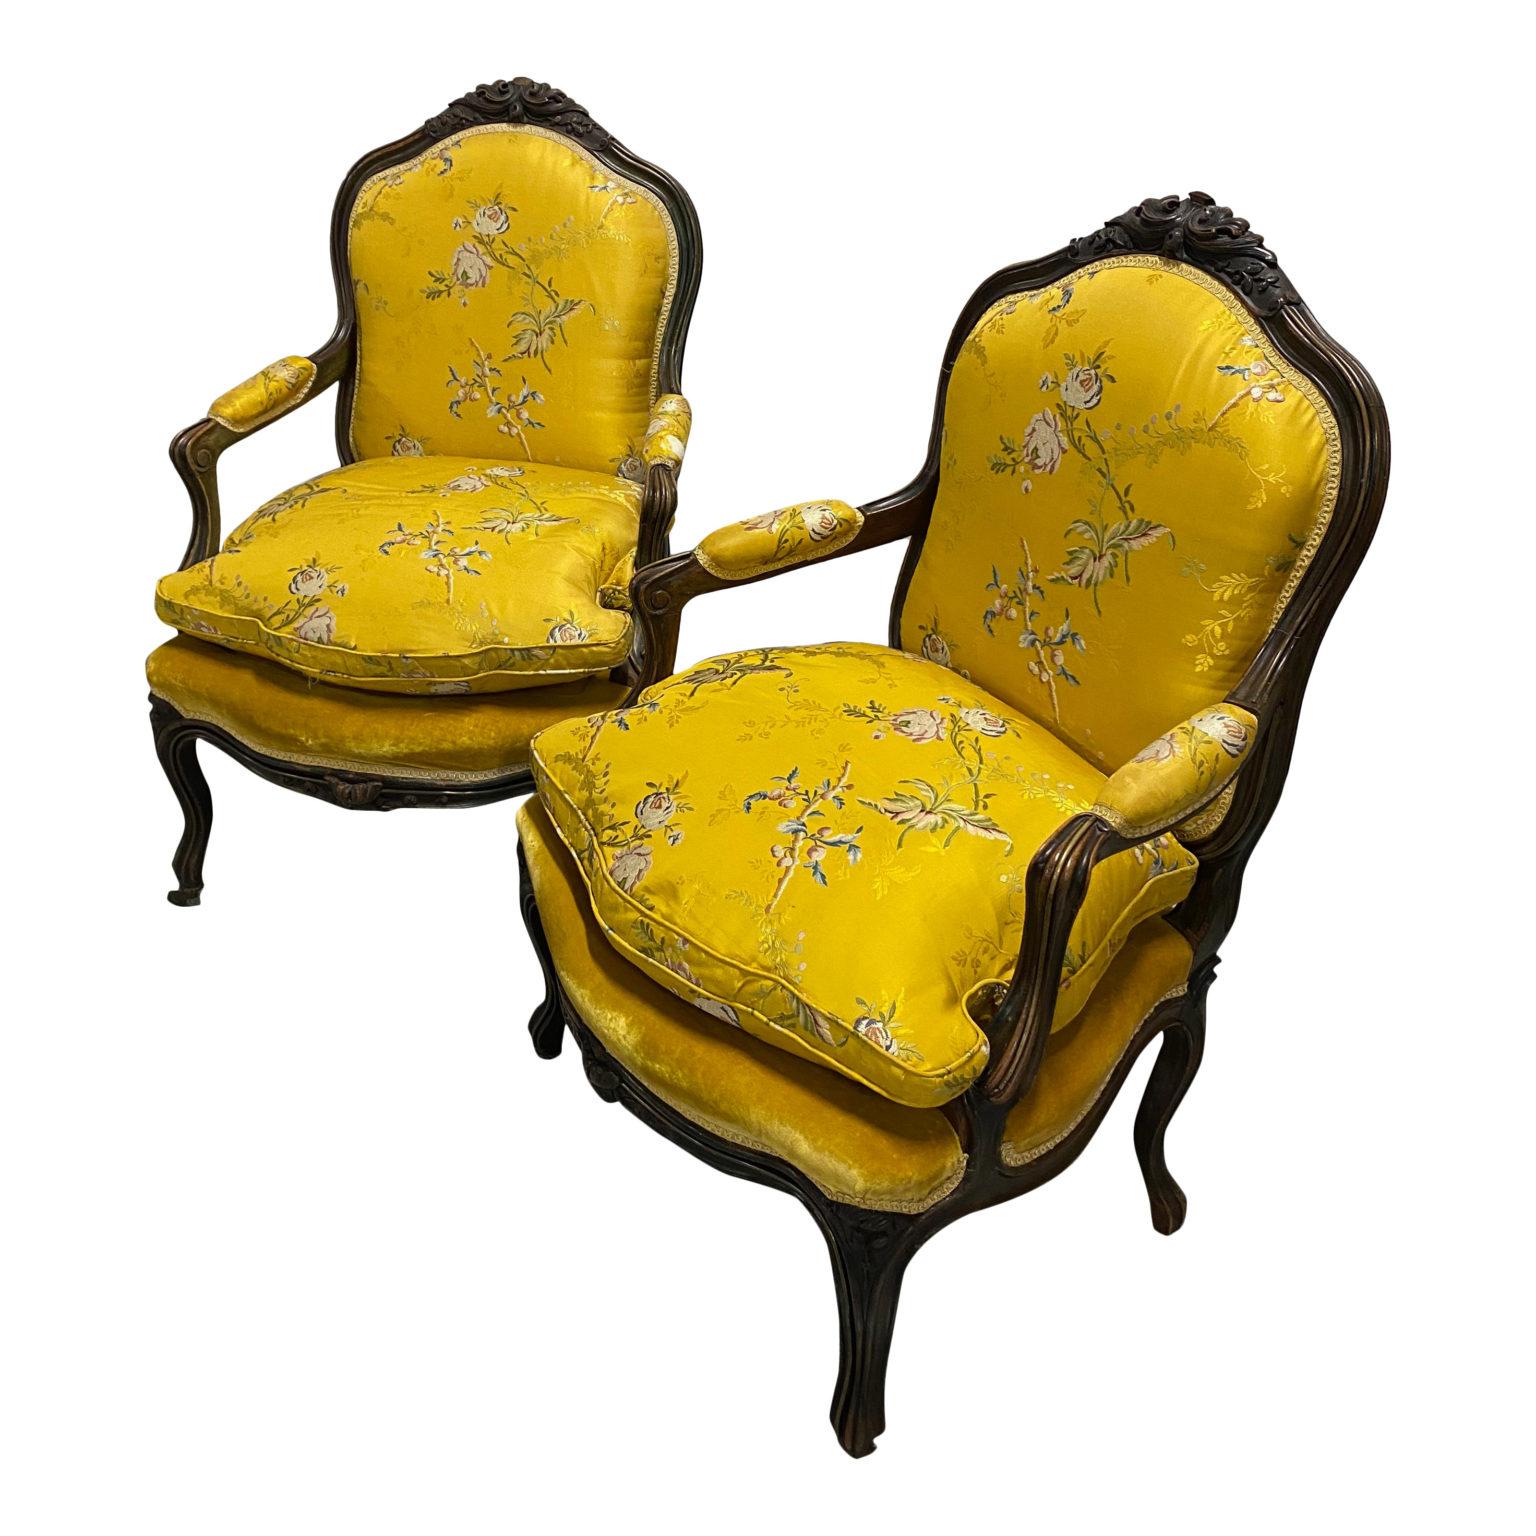 Pair of Antique Louis XV Bergere Chairs Upholstered in Silk Scalamandré Fabric In Good Condition For Sale In Sag Harbor, NY